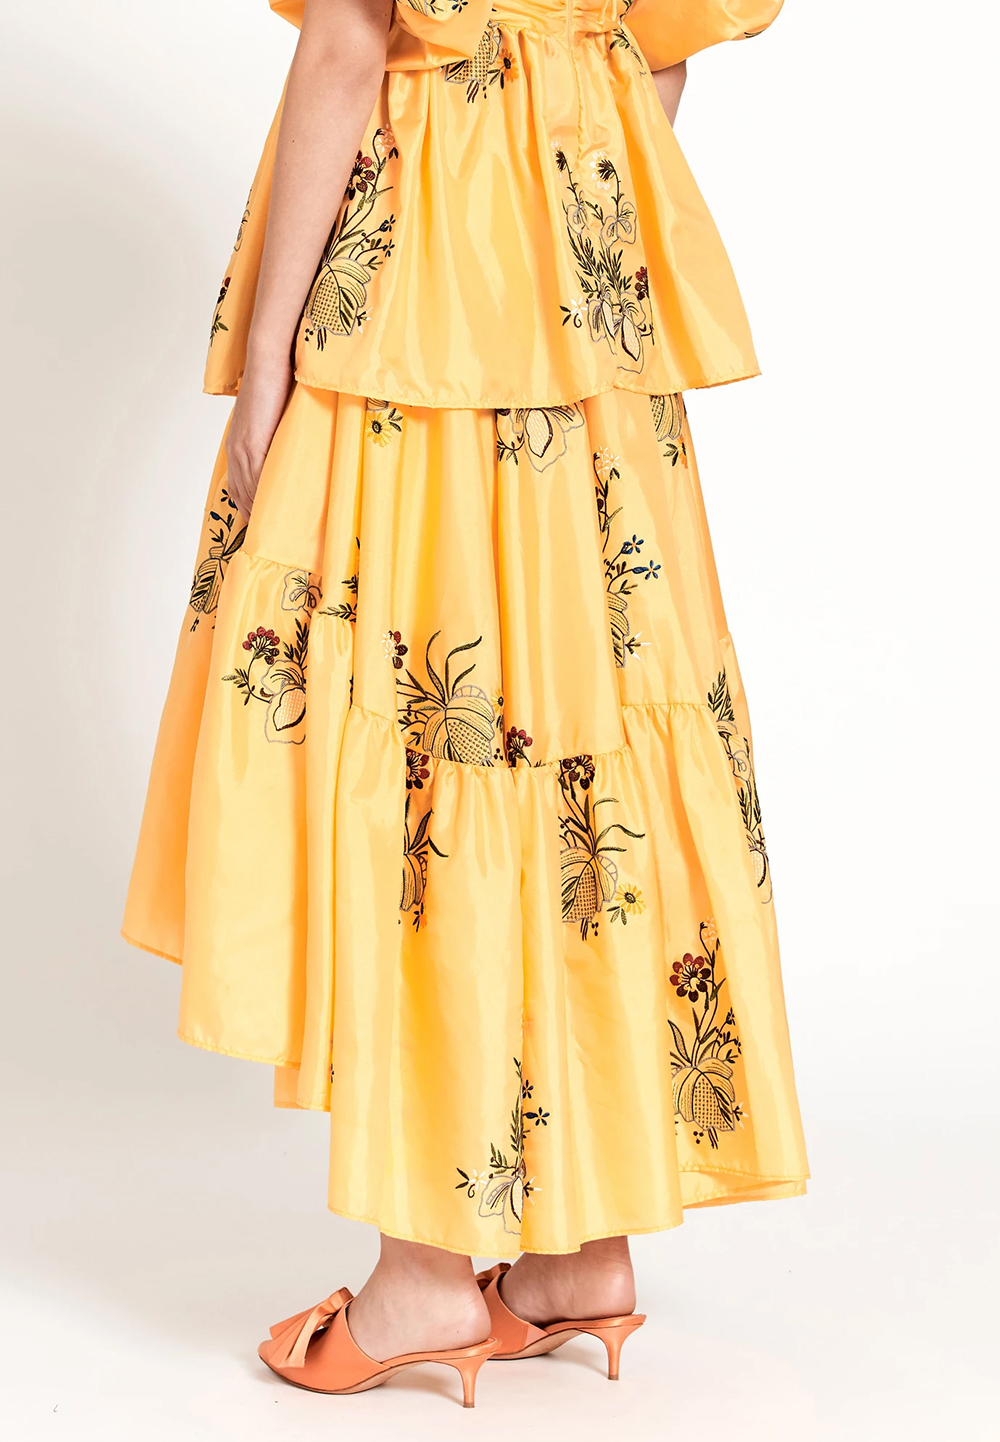 yellow floral skirt by Romance was Born